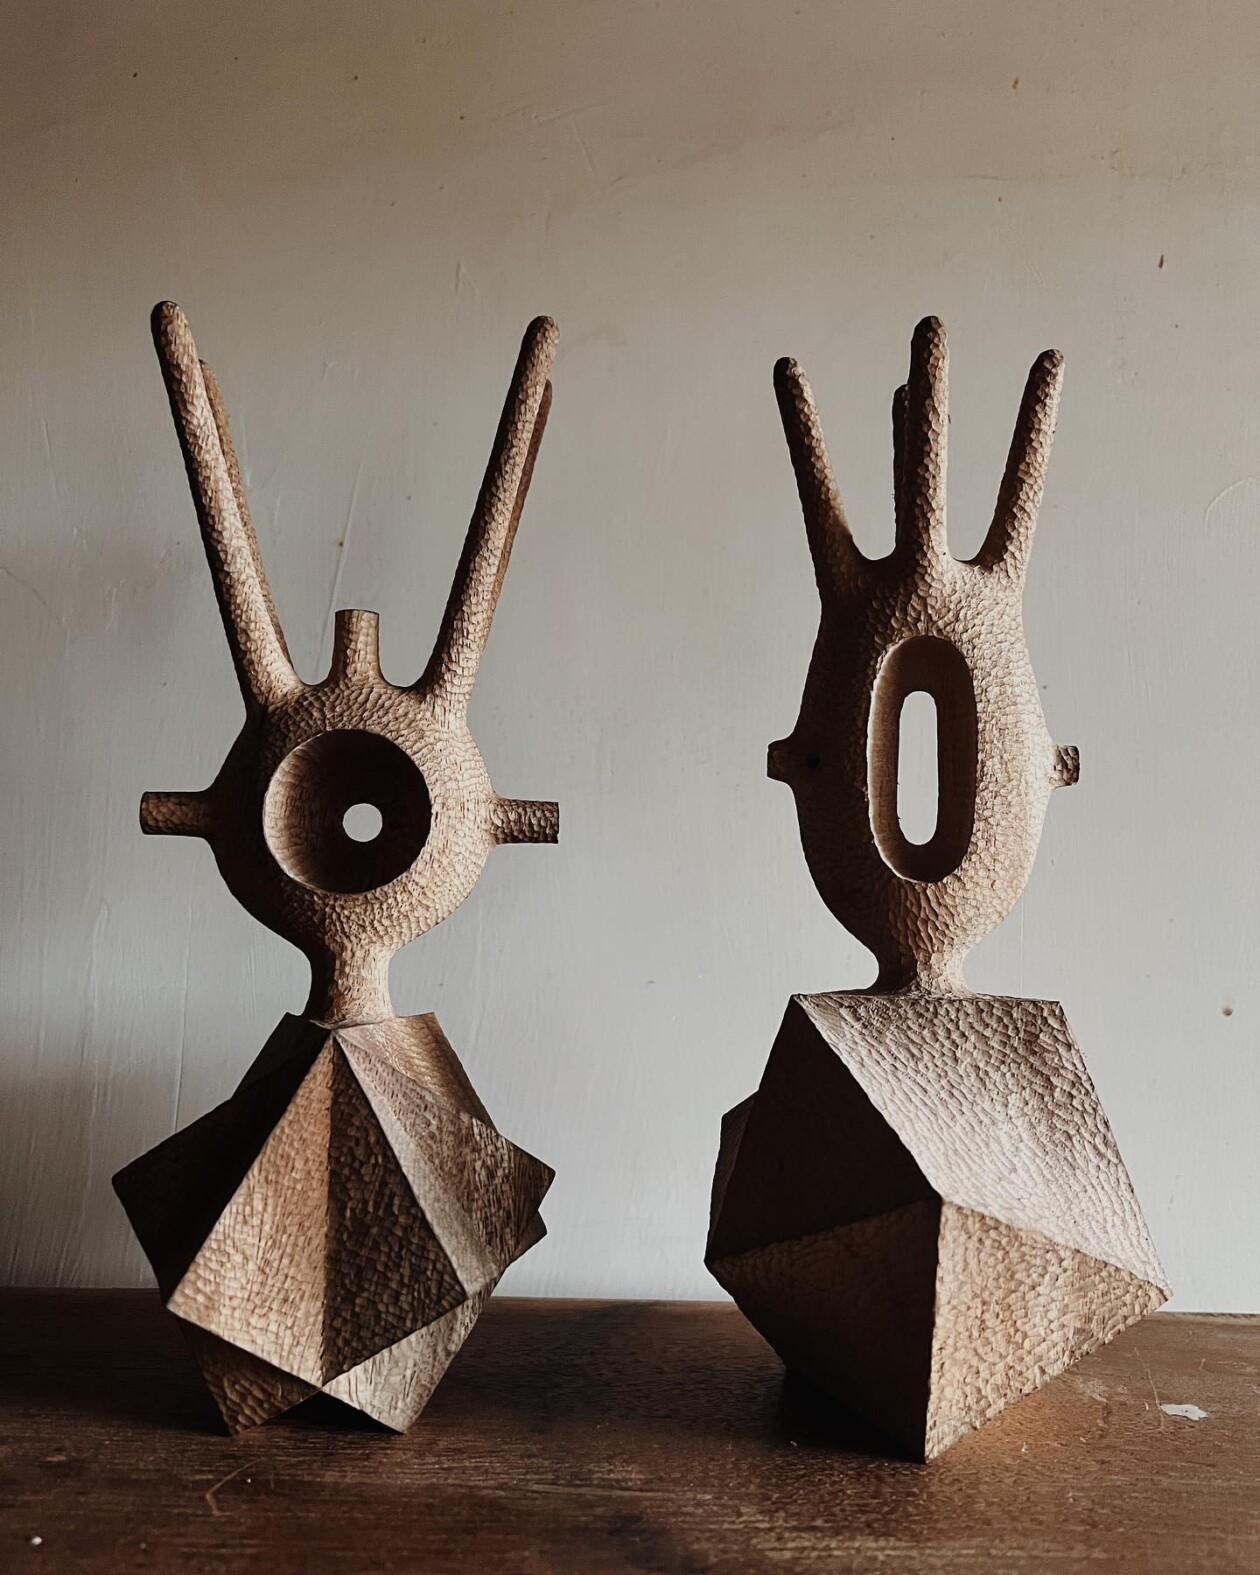 Intriguing Geometric Wood Sculptures By Aleph Geddis (16)